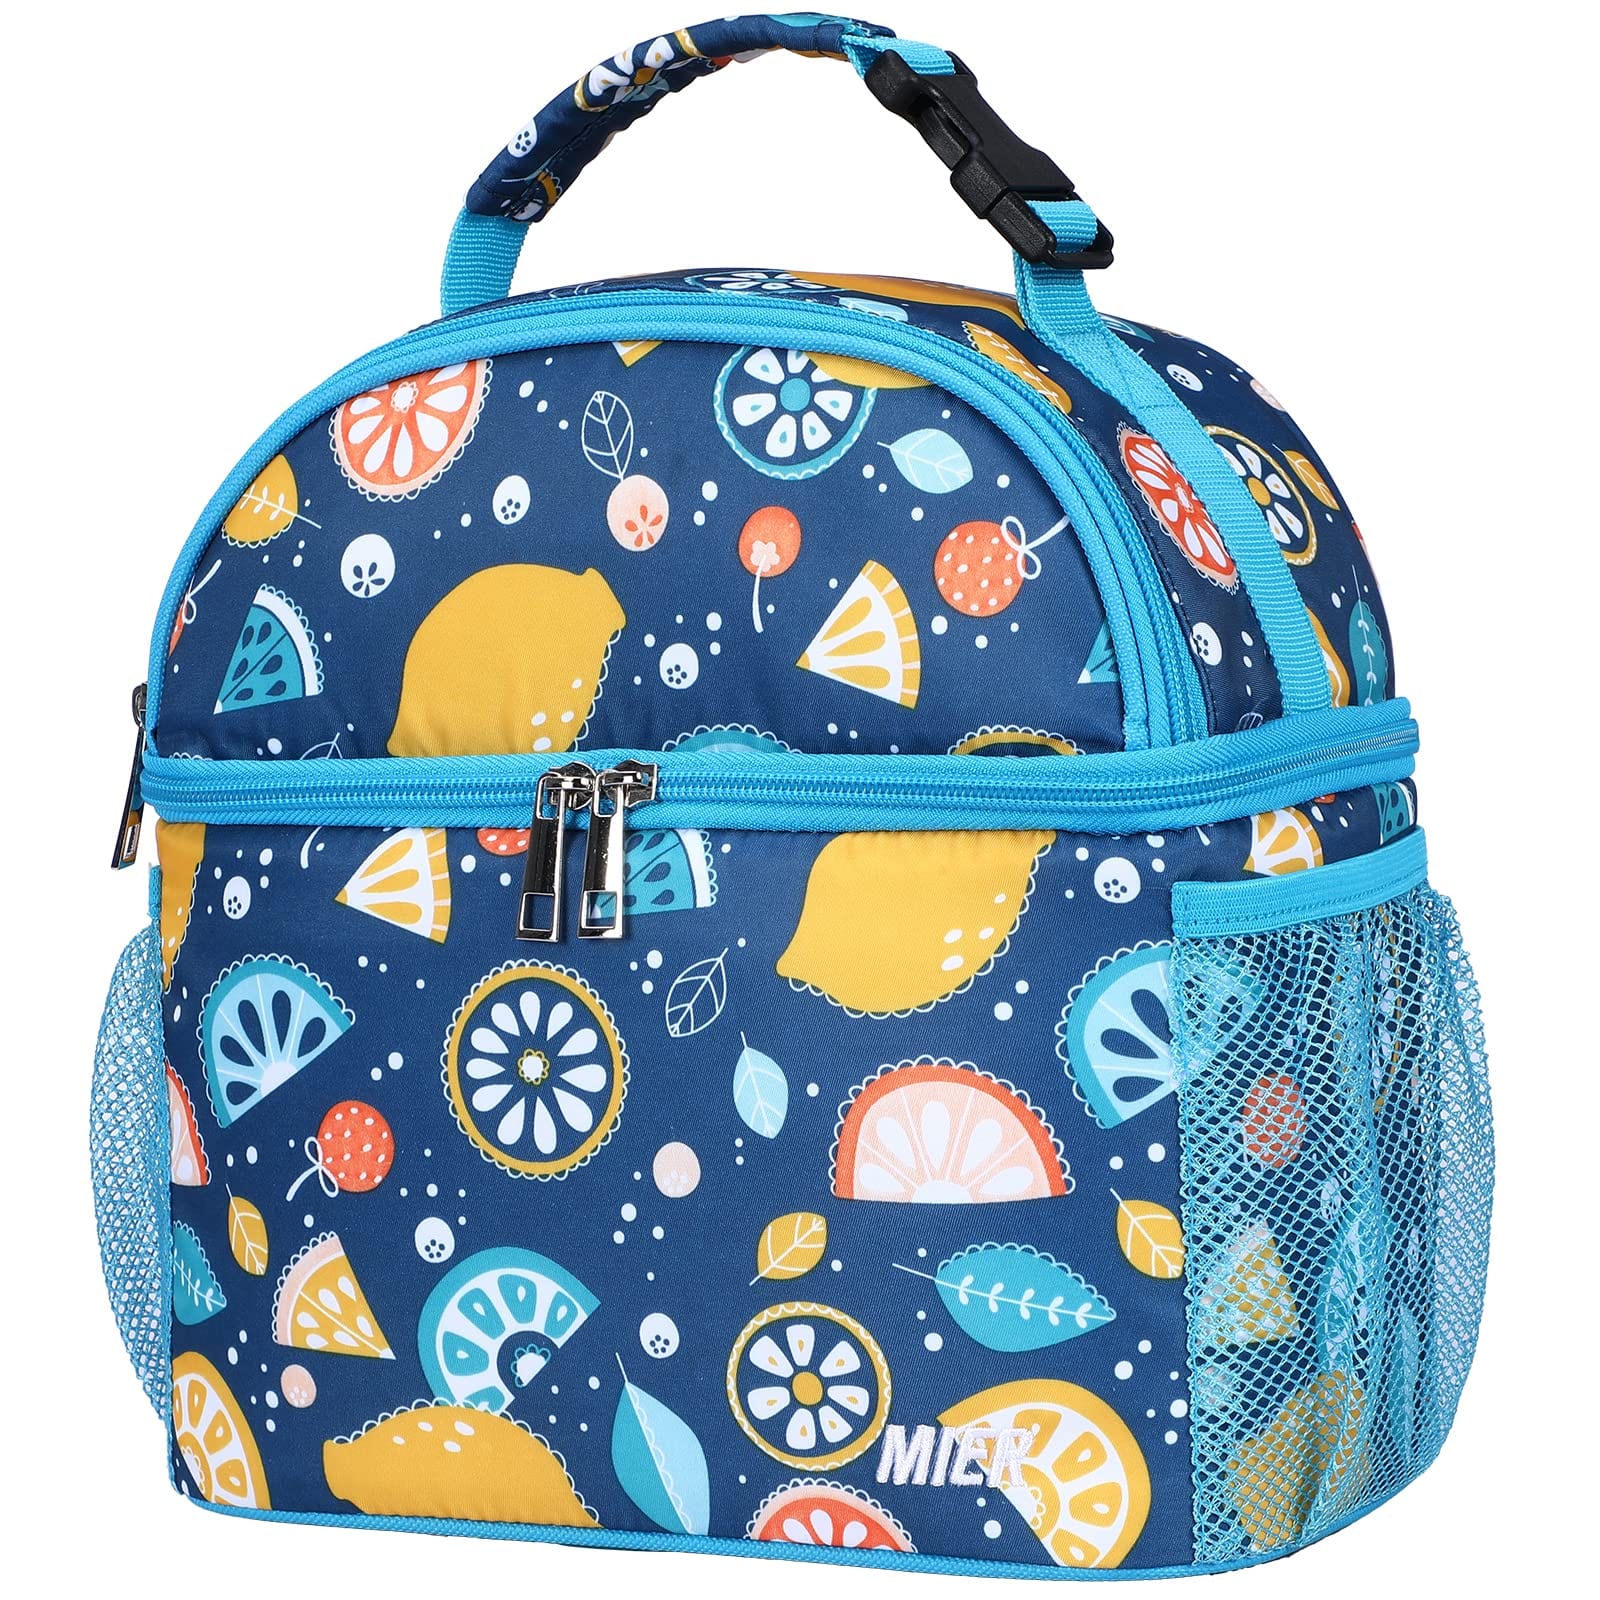 MIER Kids Lunch Bag Insulated Toddlers Lunch Cooler Tote, Blue Lemon